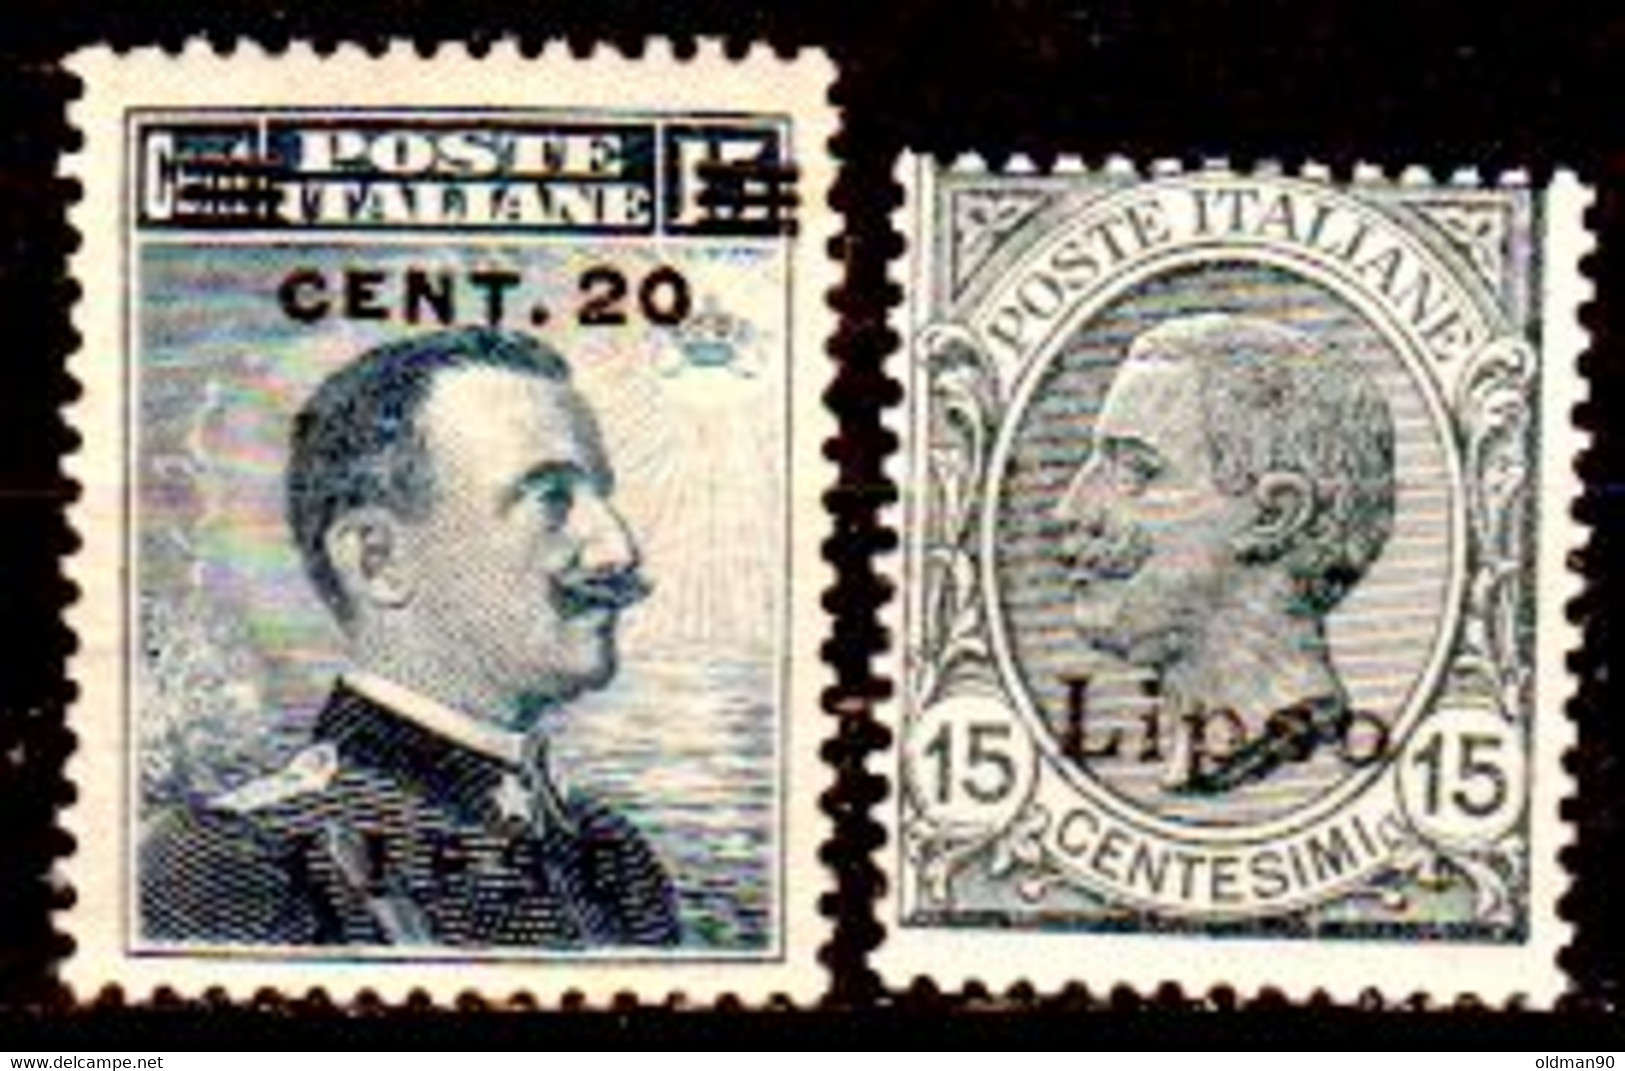 Egeo-OS-299- Lipso: Original Stamps And Overprint 1916-21 (++) MNH - Quality In Your Opinion. - Egeo (Lipso)